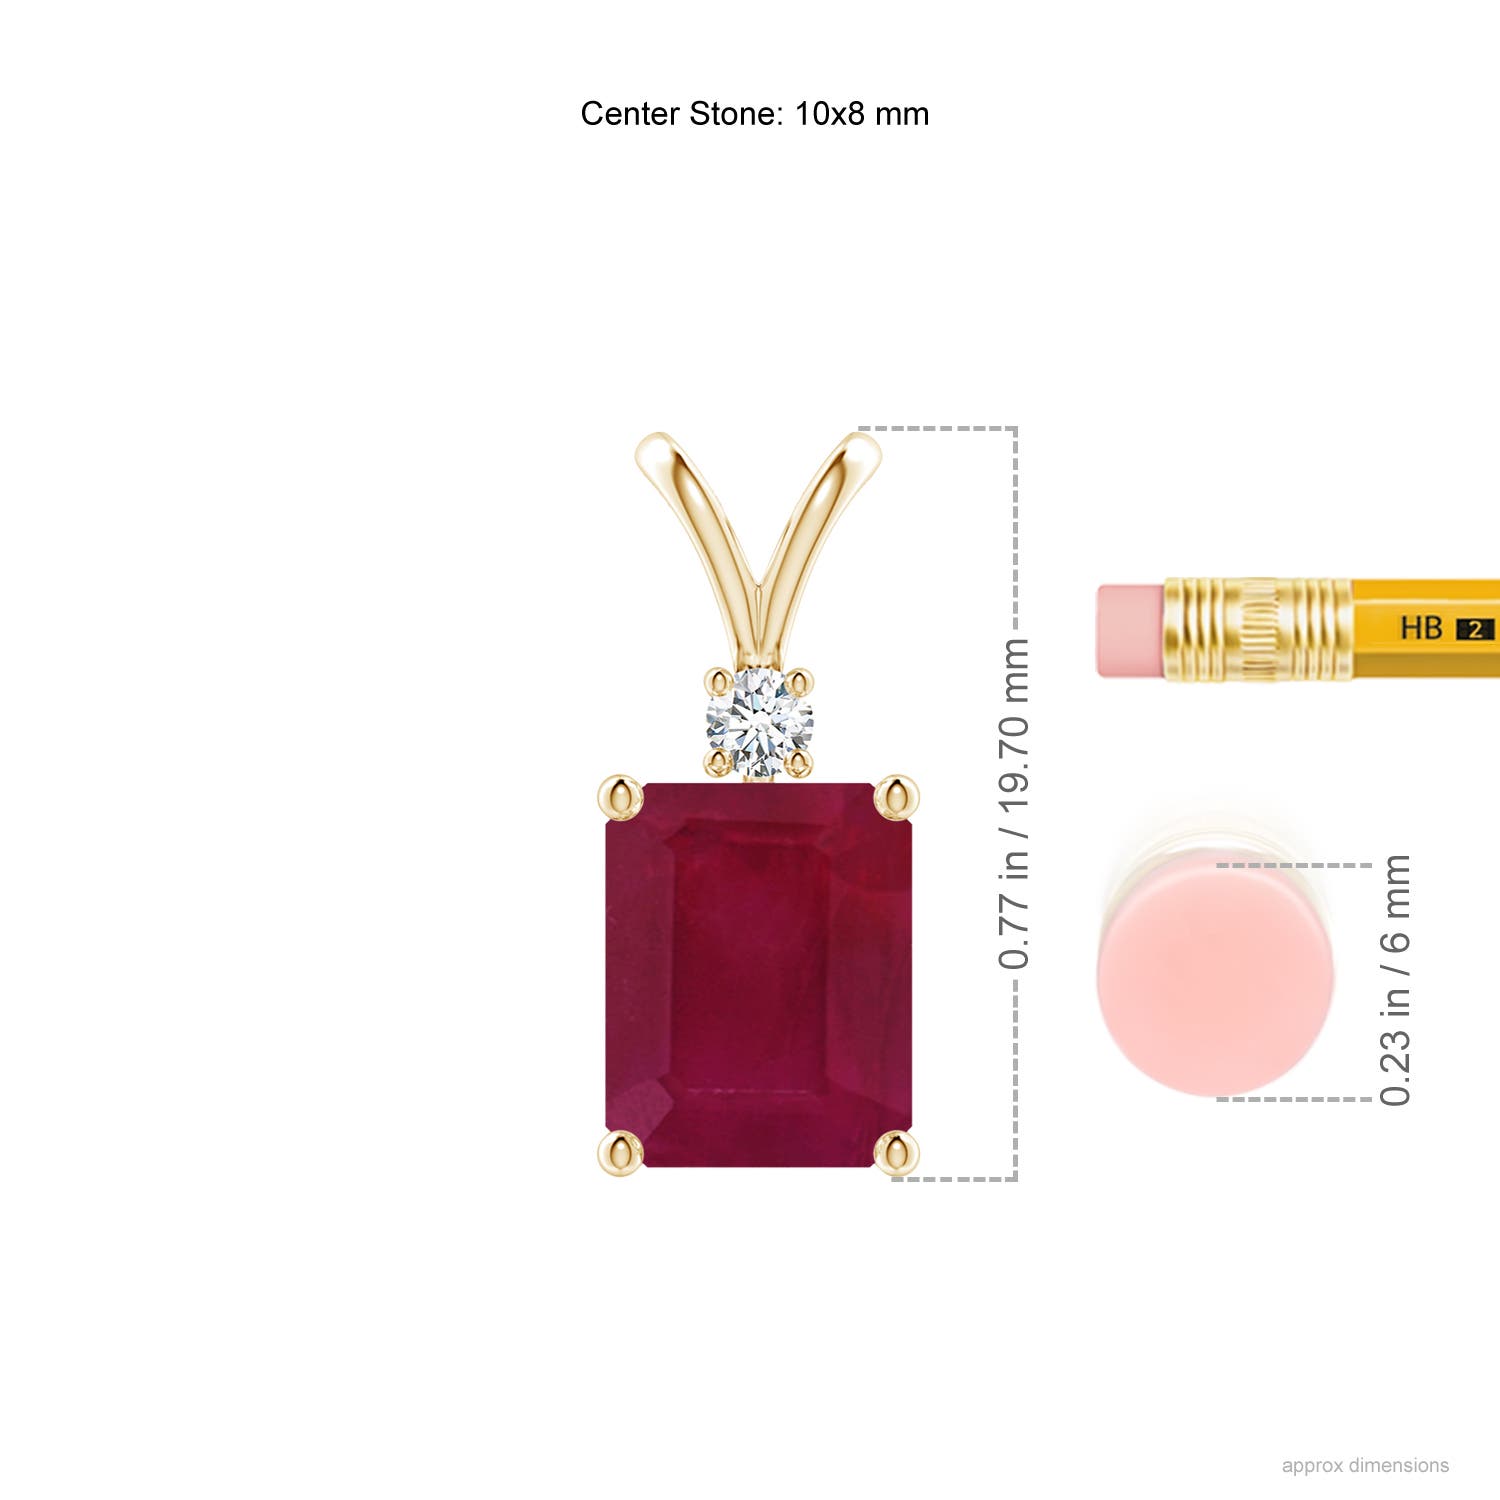 A - Ruby / 4.11 CT / 14 KT Yellow Gold